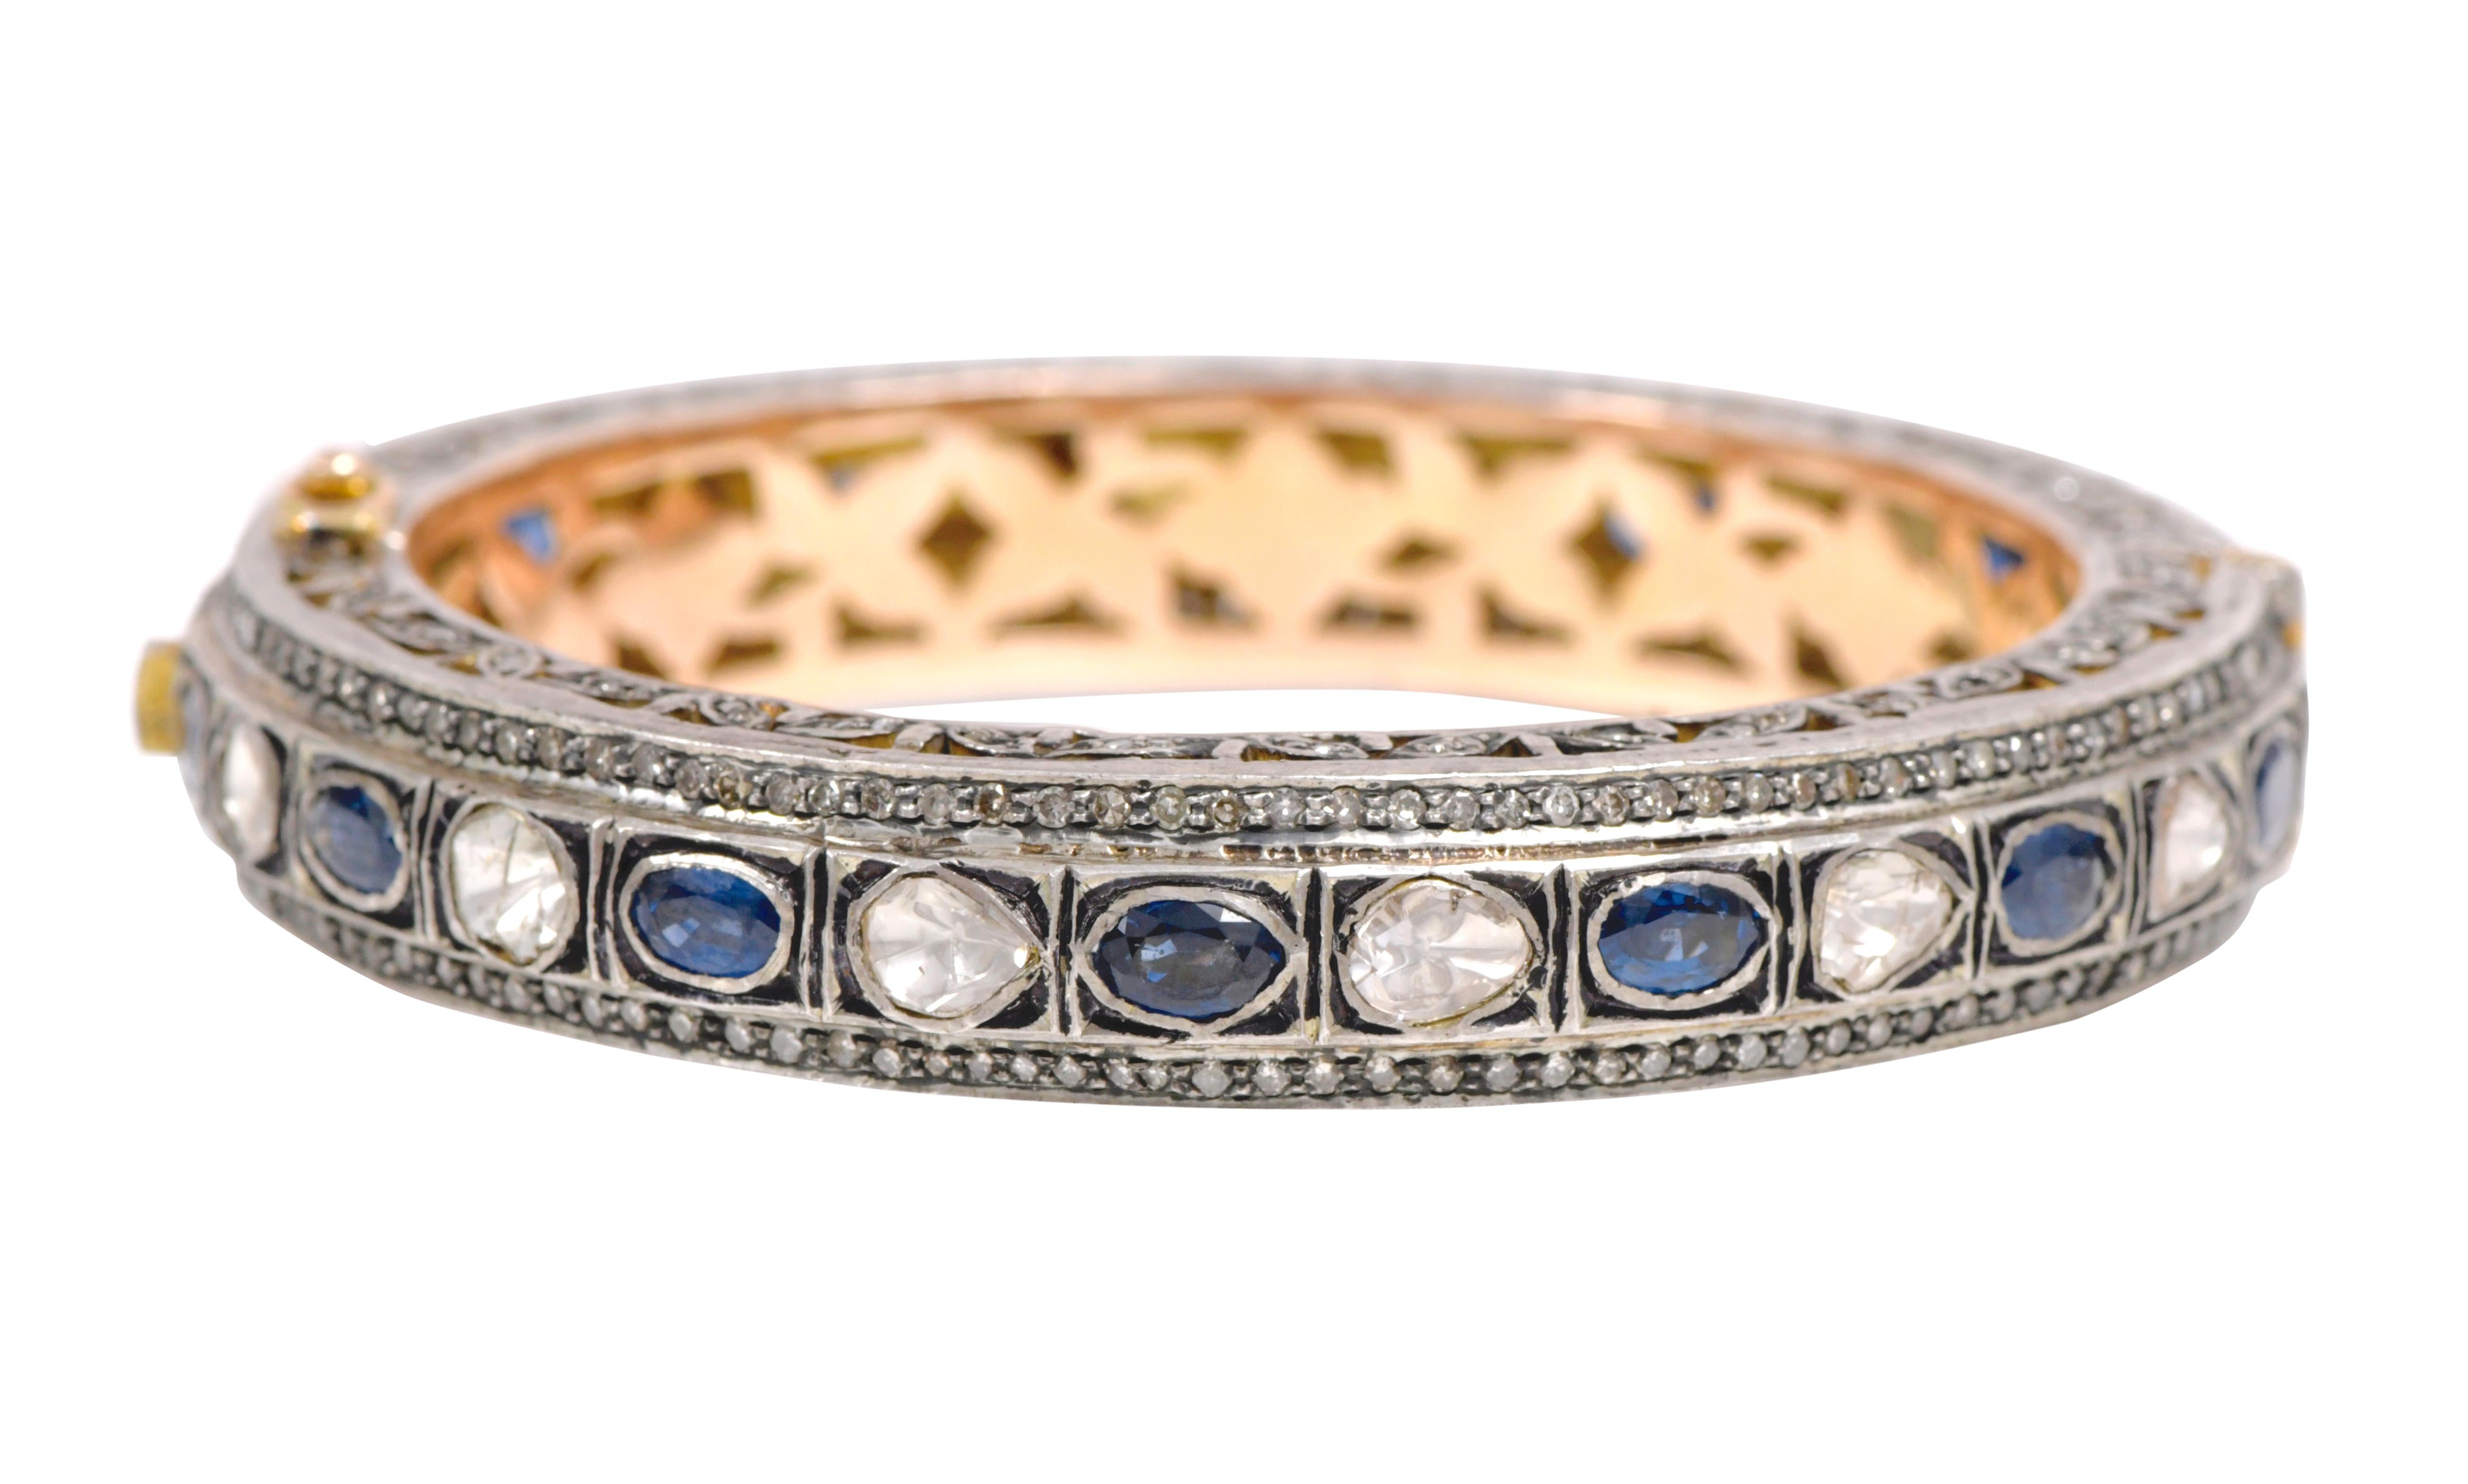 Diamond and Blue Sapphire Tennis Bangle in Art-Deco Style

This Victorian period art-deco atypical polki diamond and vivid blue sapphire bangle is marvelous. The uneven triangle and U-cut flat polki diamond solitaires alternated with oval shape